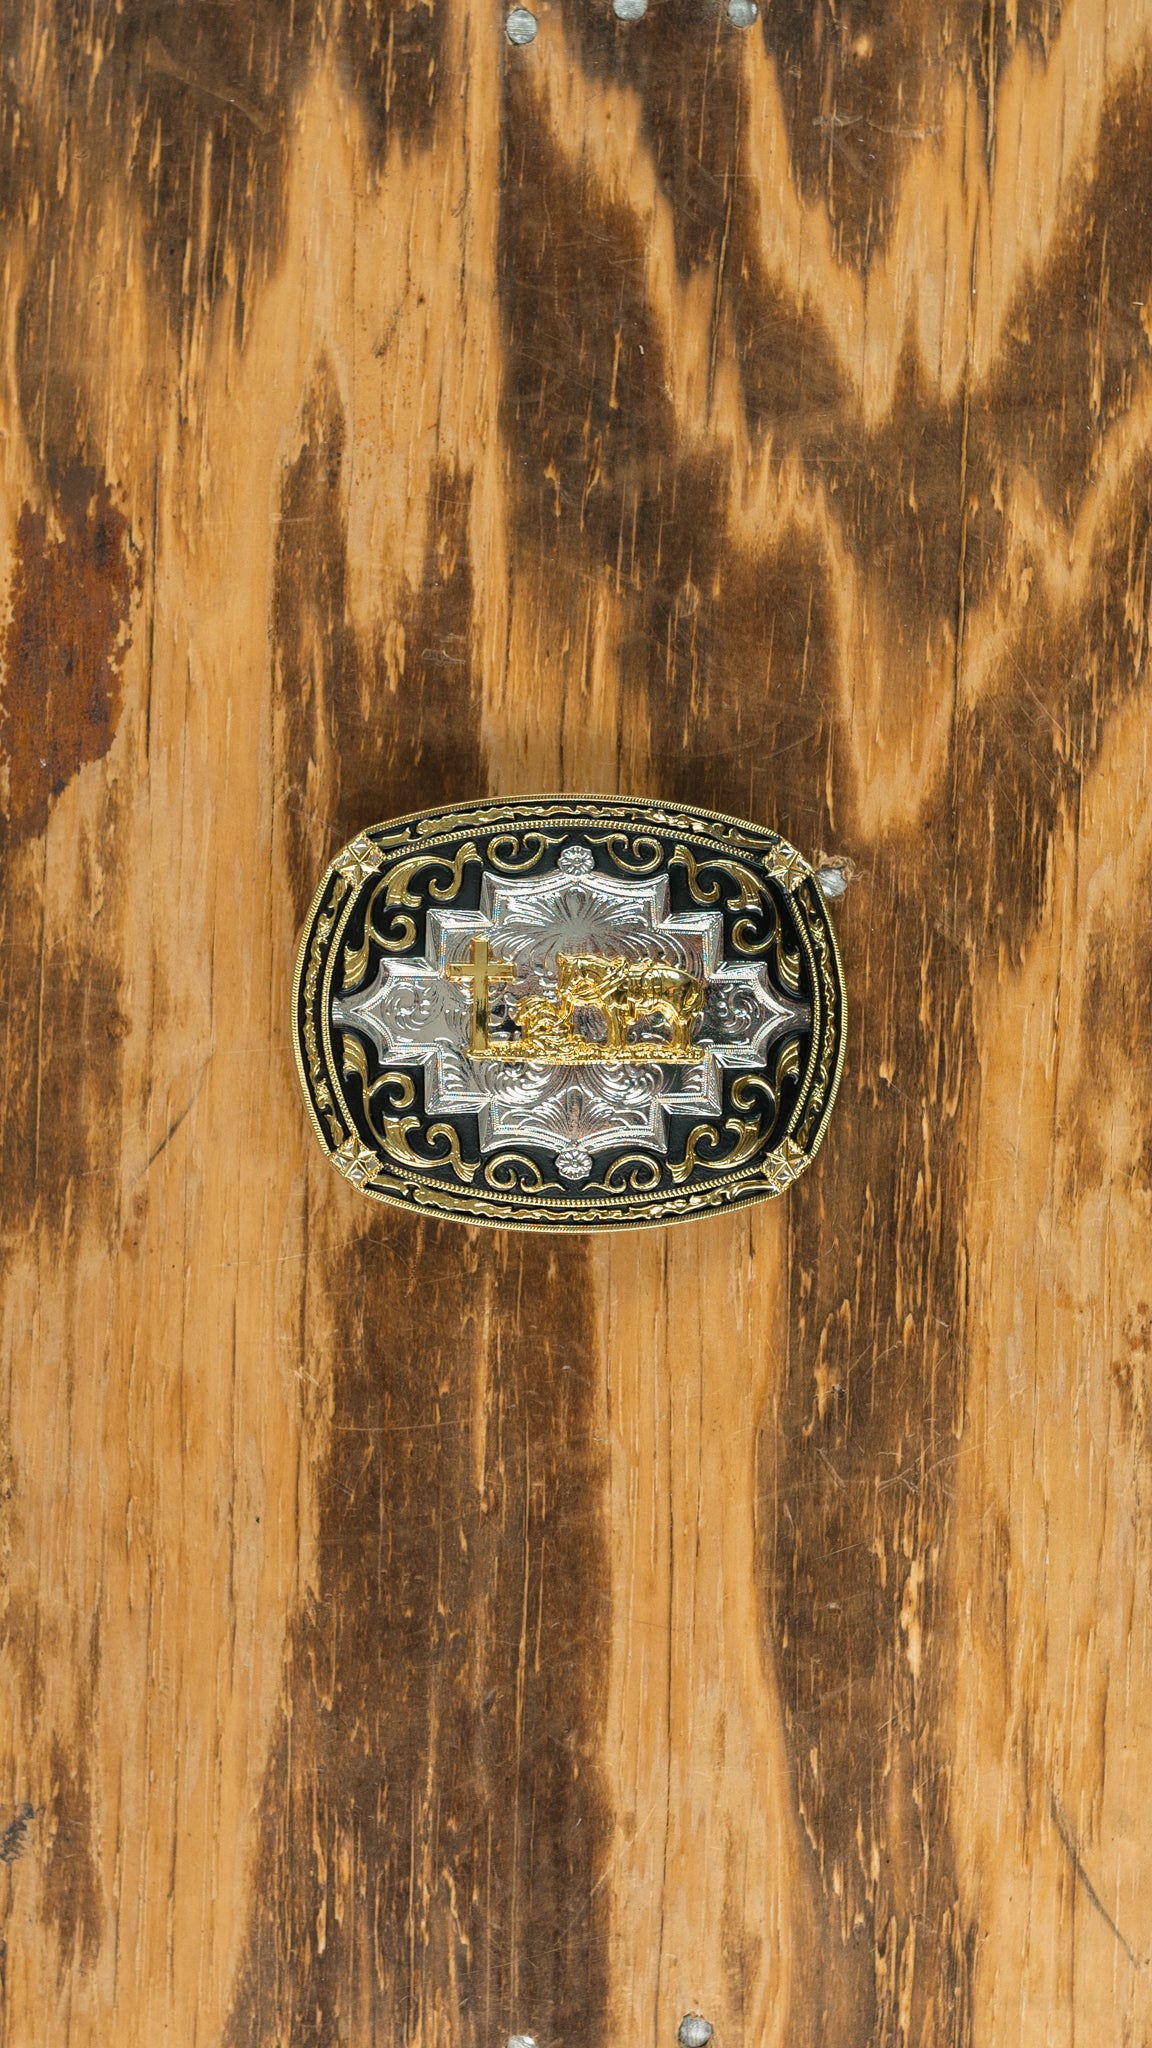 Black Silver and Gold Belt Buckle